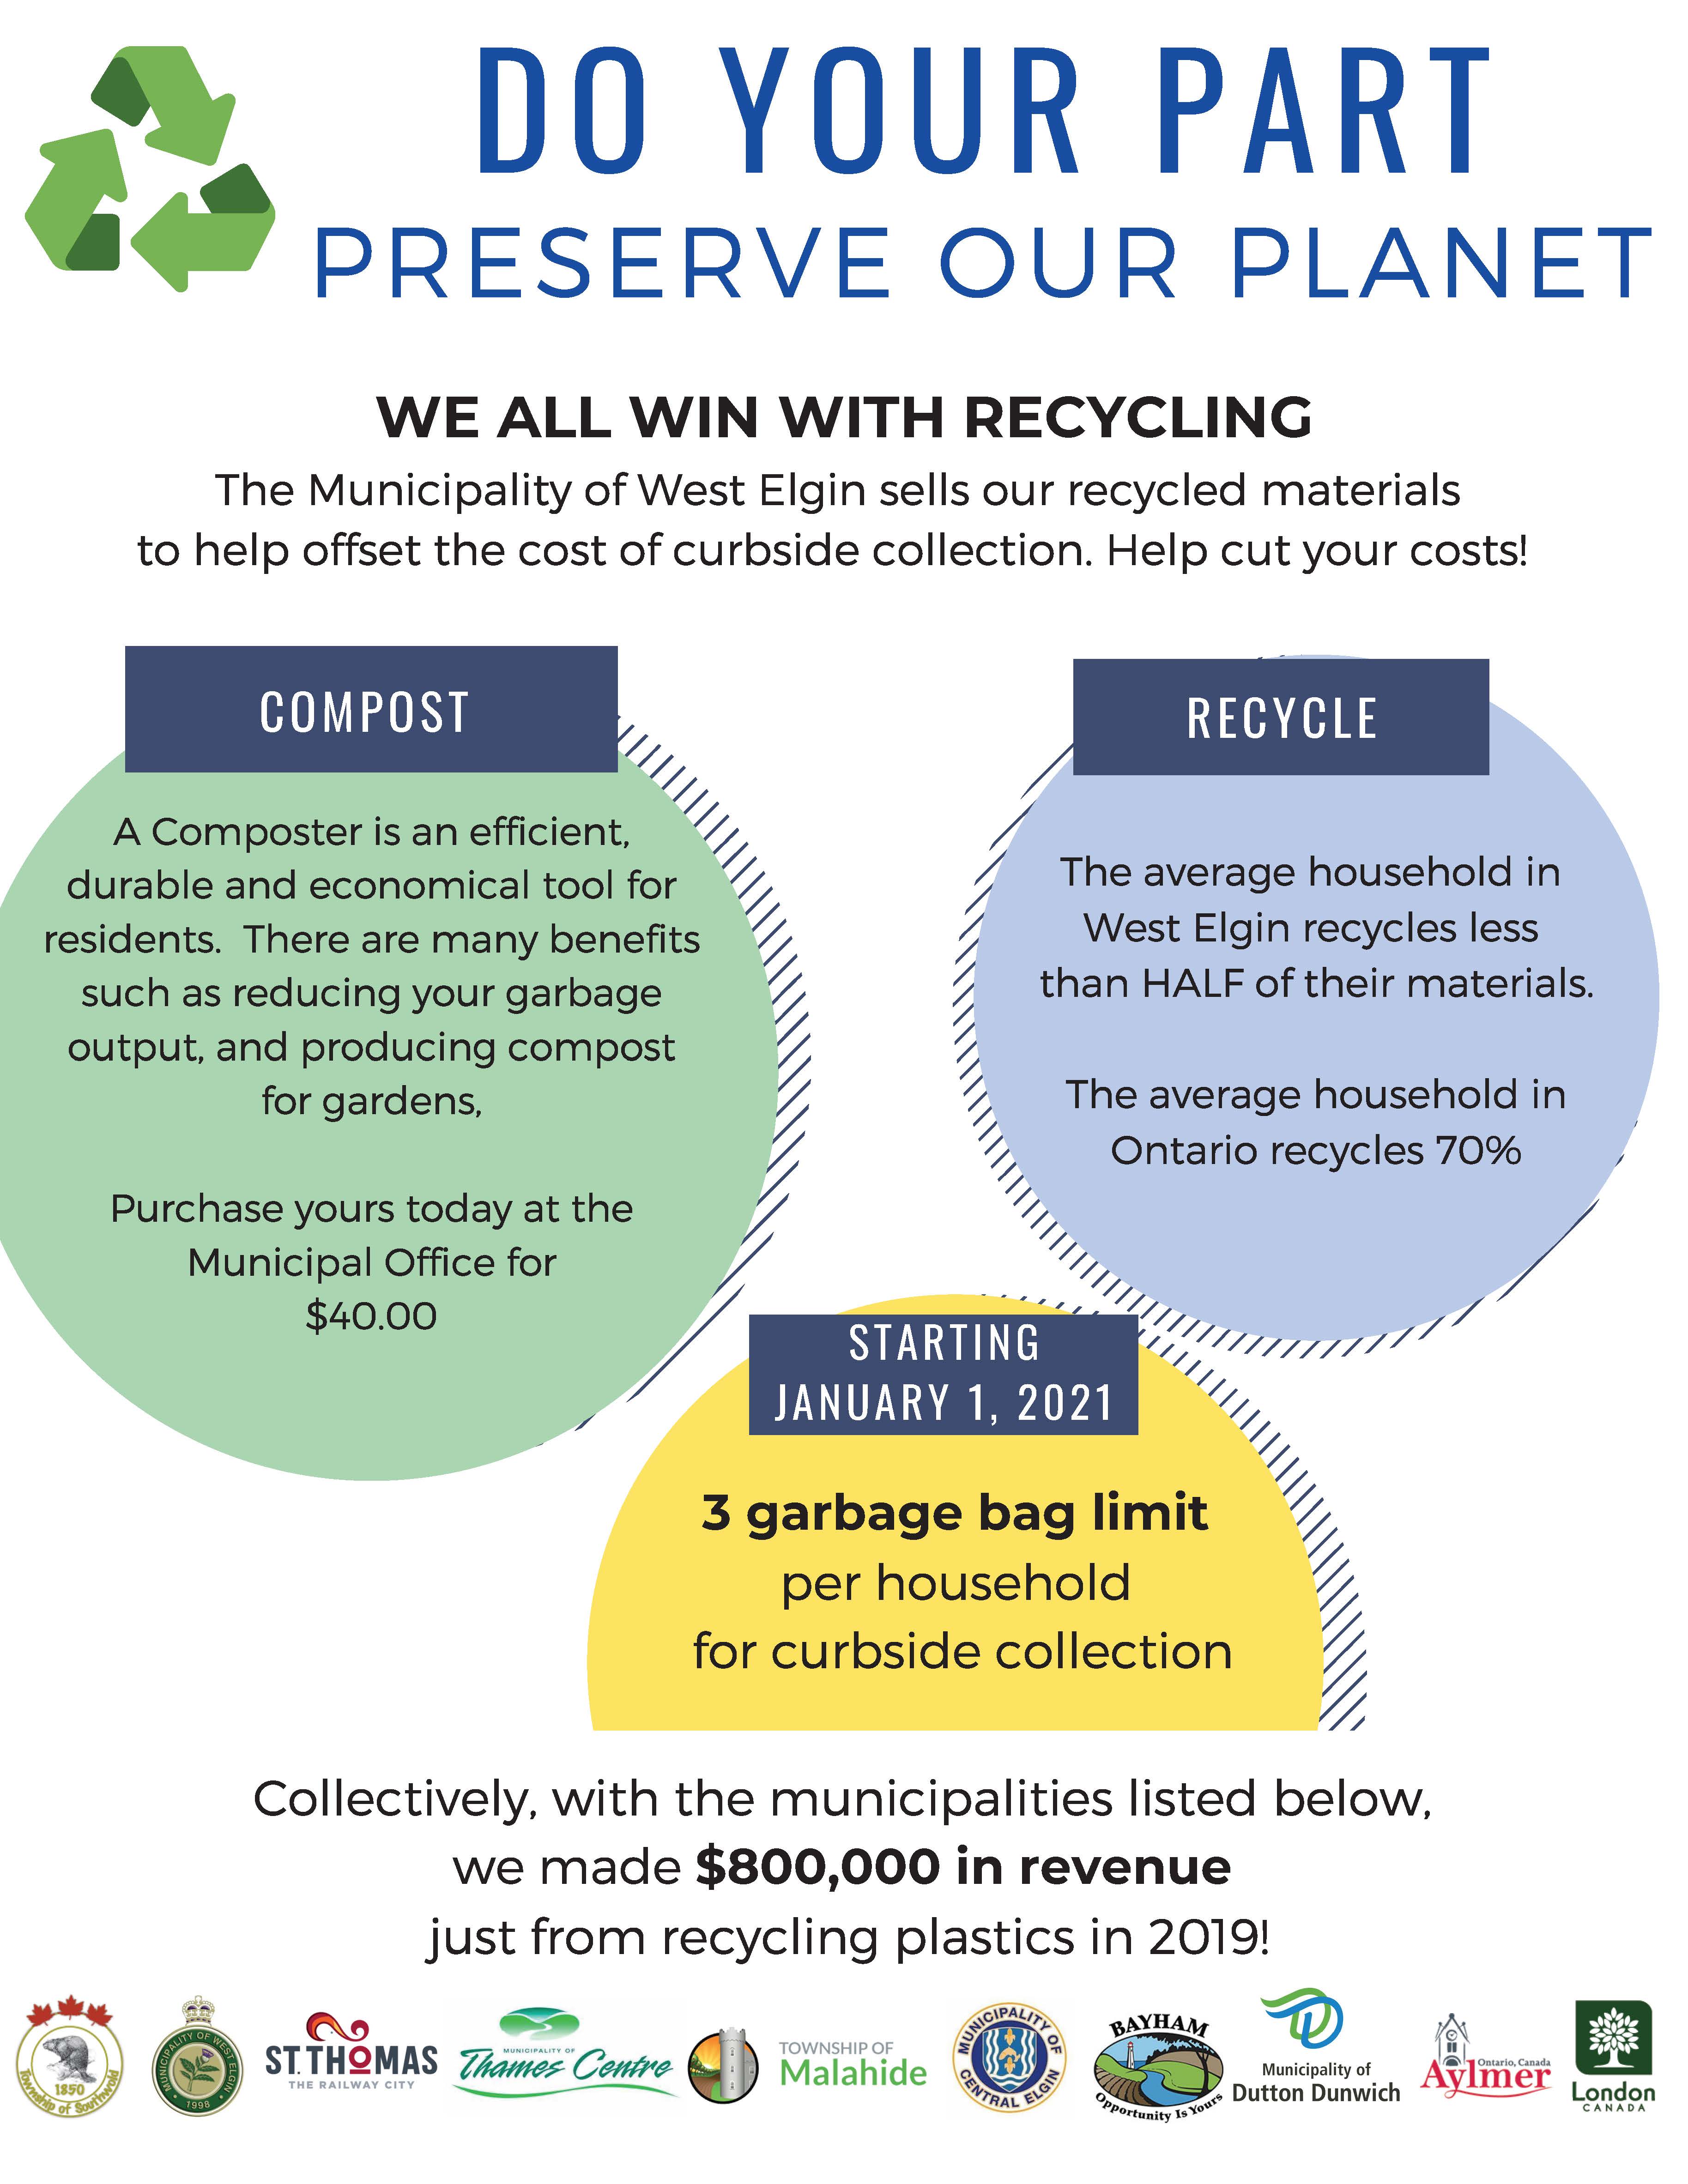 Information on recycling